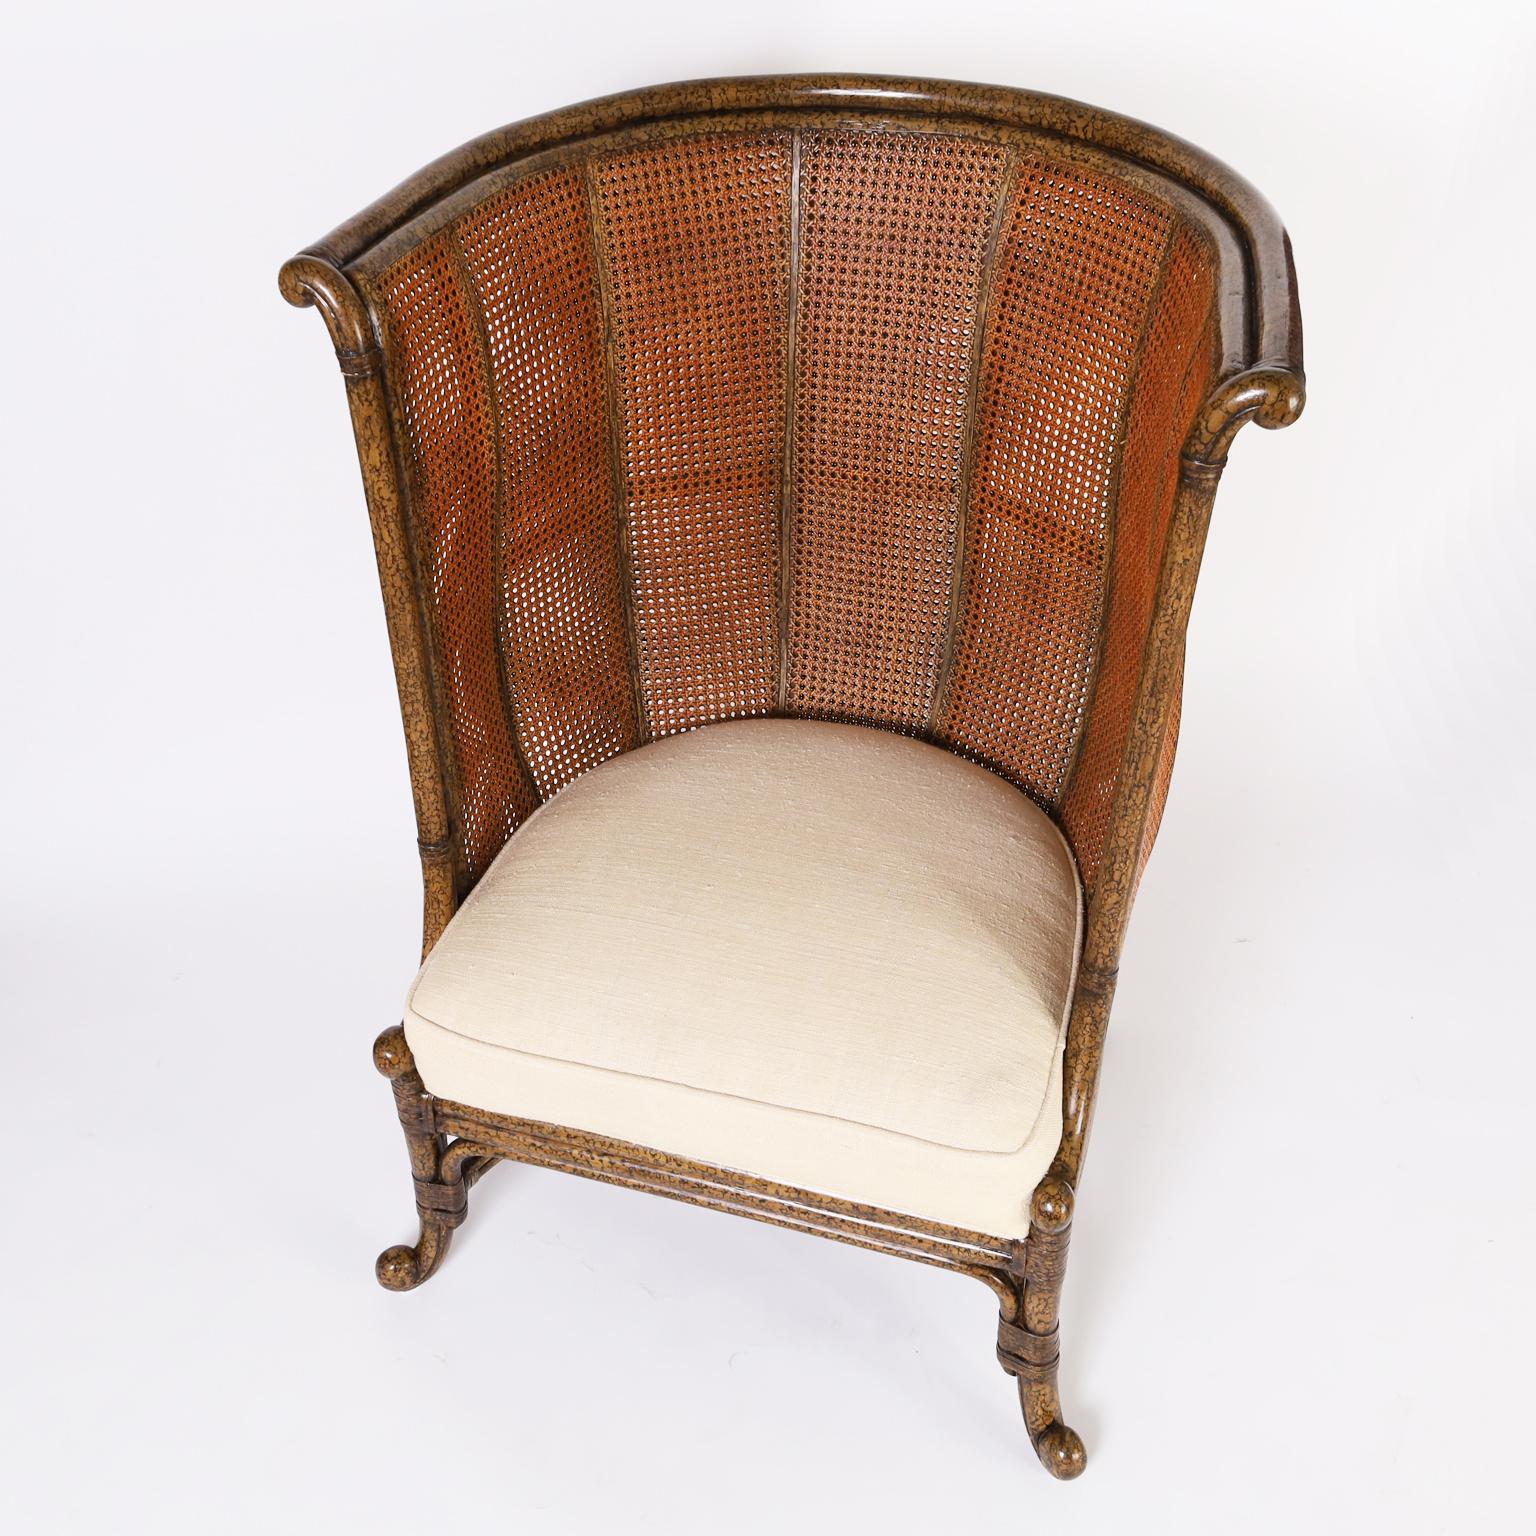 20th Century Maitland-Smith British Colonial Style Wingback Chair